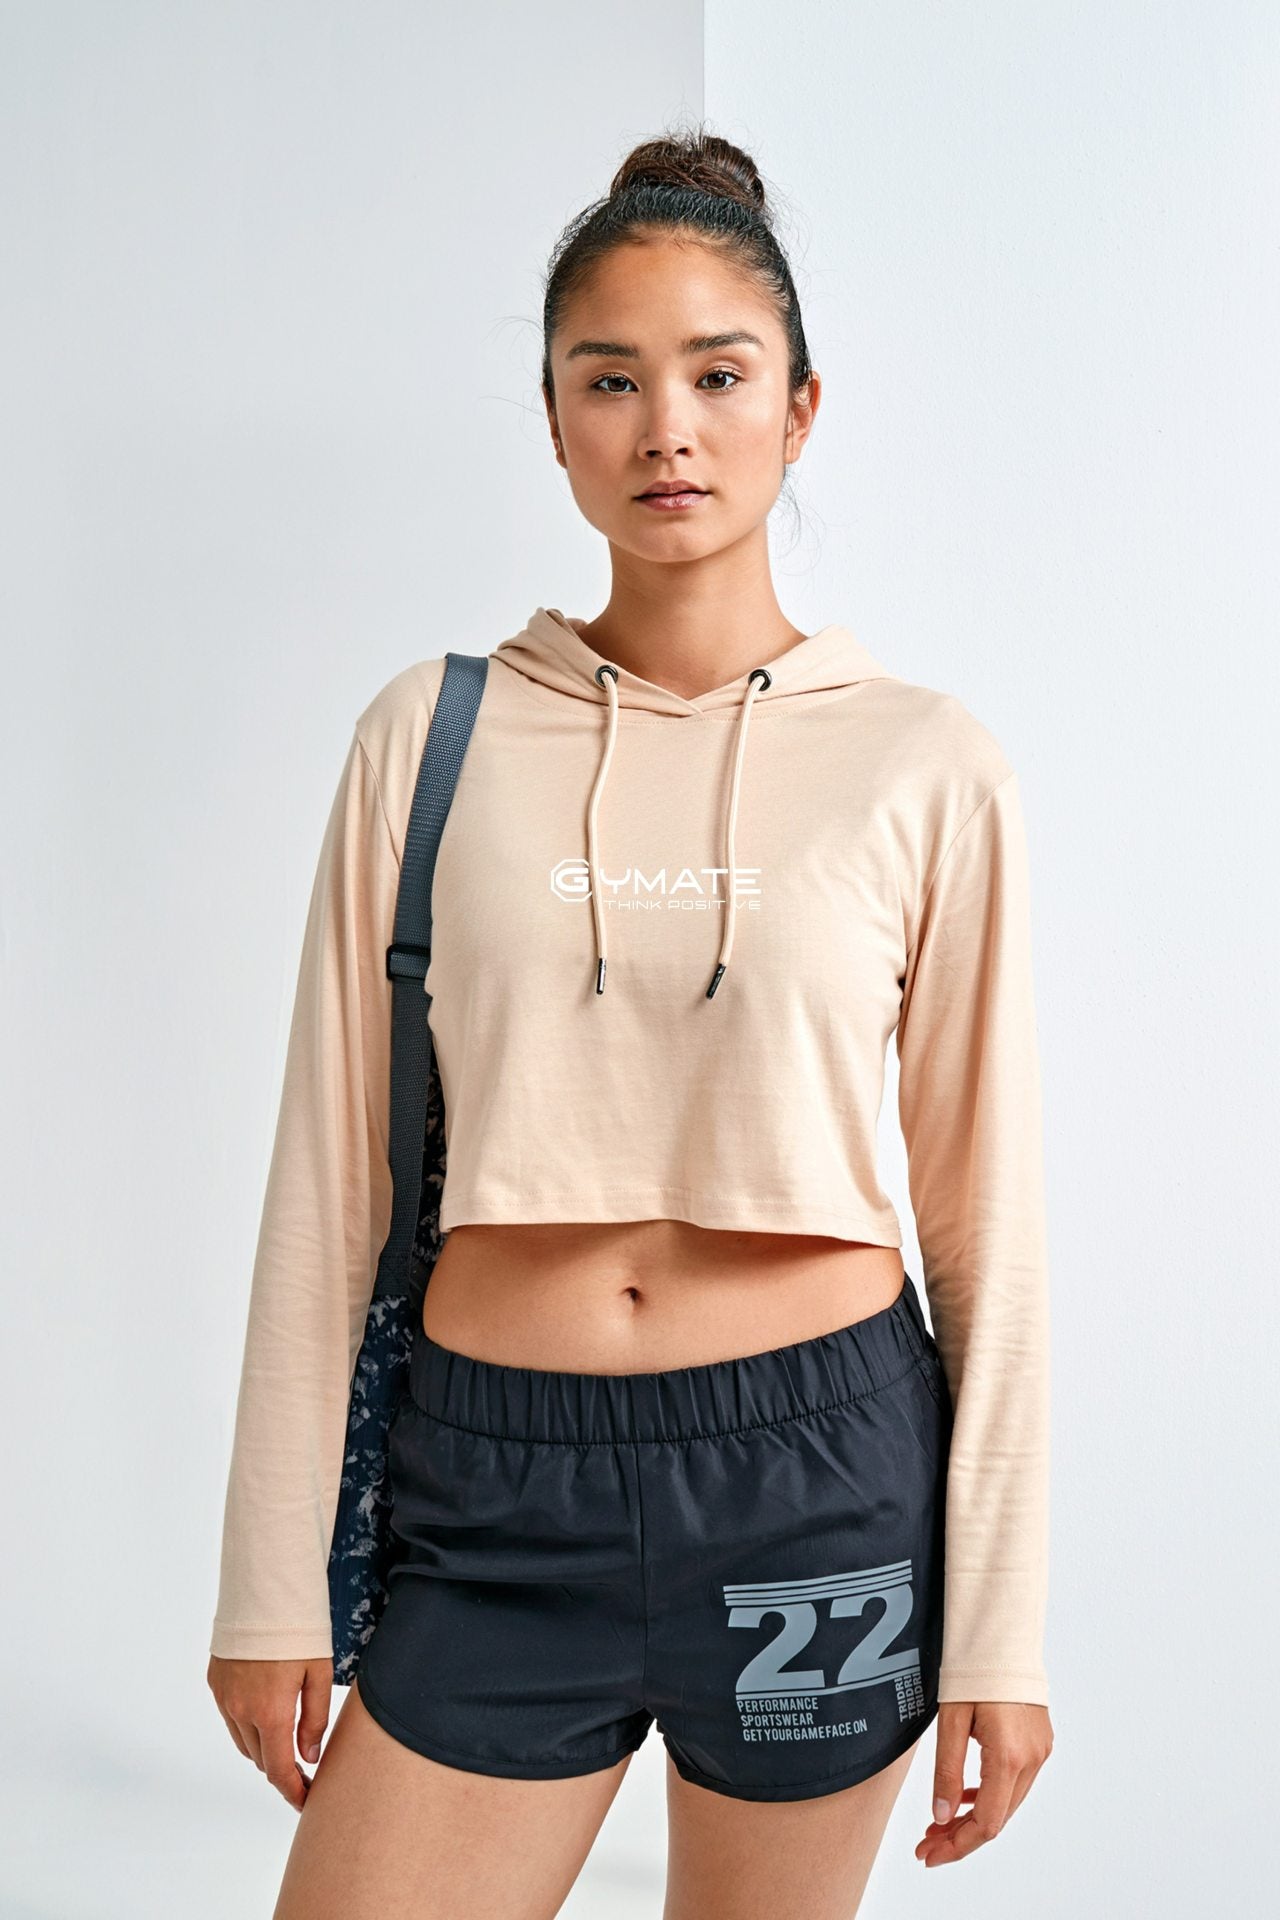 Gymate Pro cropped hooded t shirt natural model front